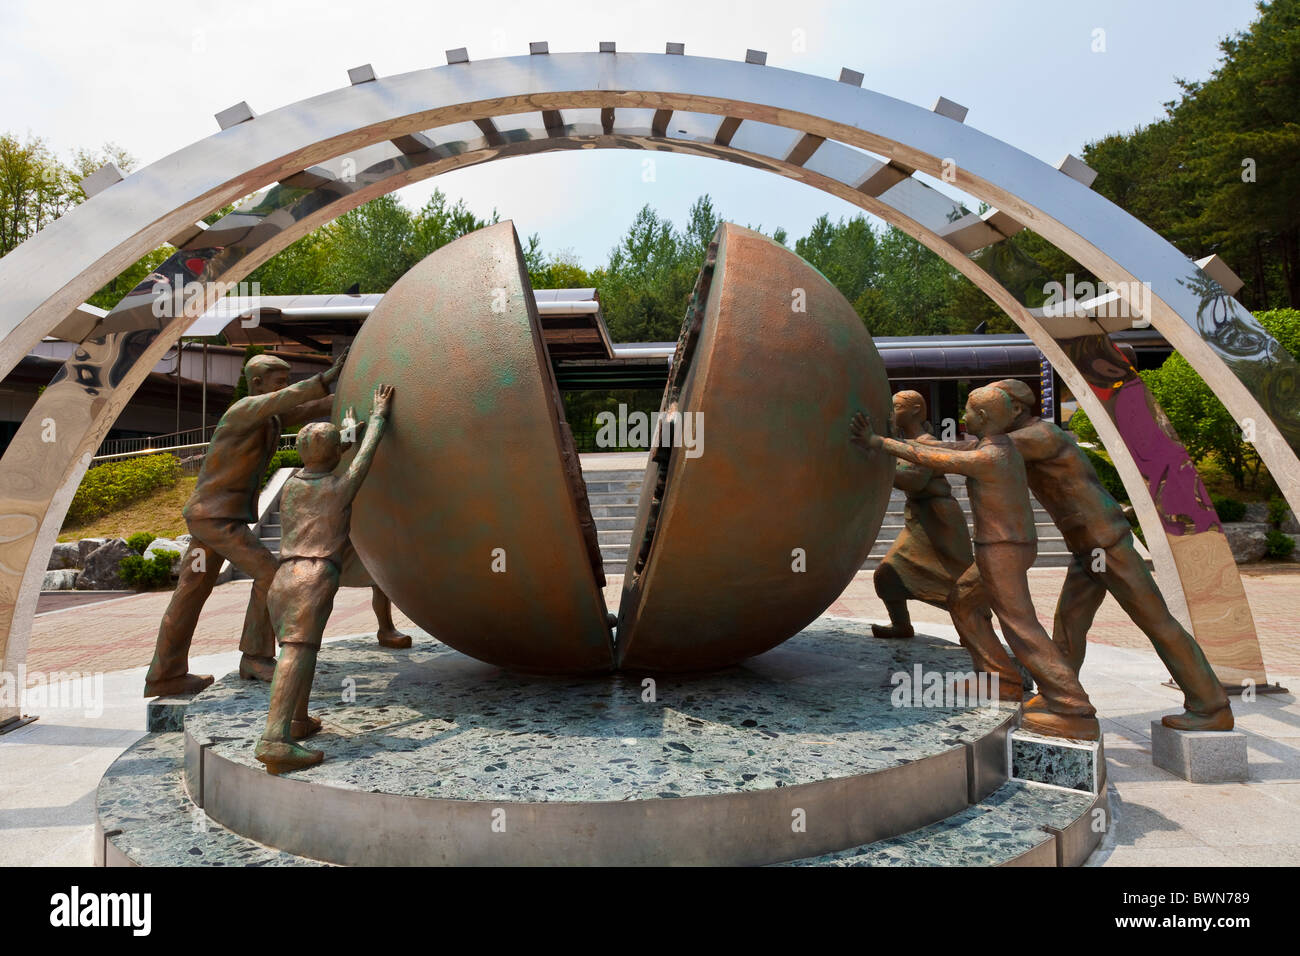 Re-Unification Sculpture at the entrance to the Third Tunnel at the DMZ Demilitarized Zone Panmunjeon South Korea. JMH3804 Stock Photo